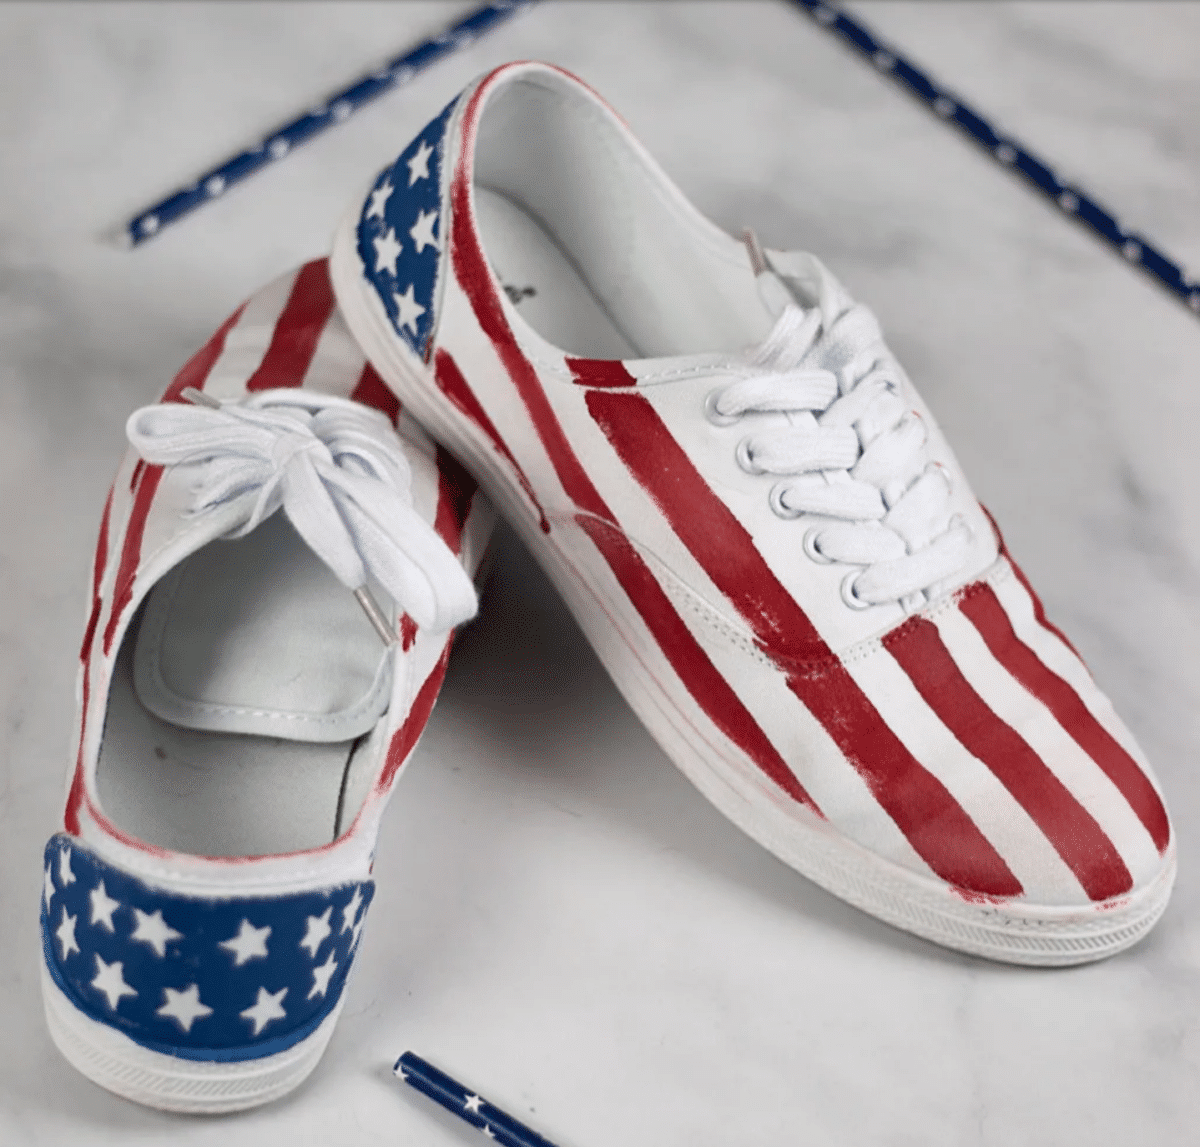 A pair of sneakers painted with the American flag design, featuring stripes and stars, on a white surface next to red and blue pencils for Fourth of July crafts.